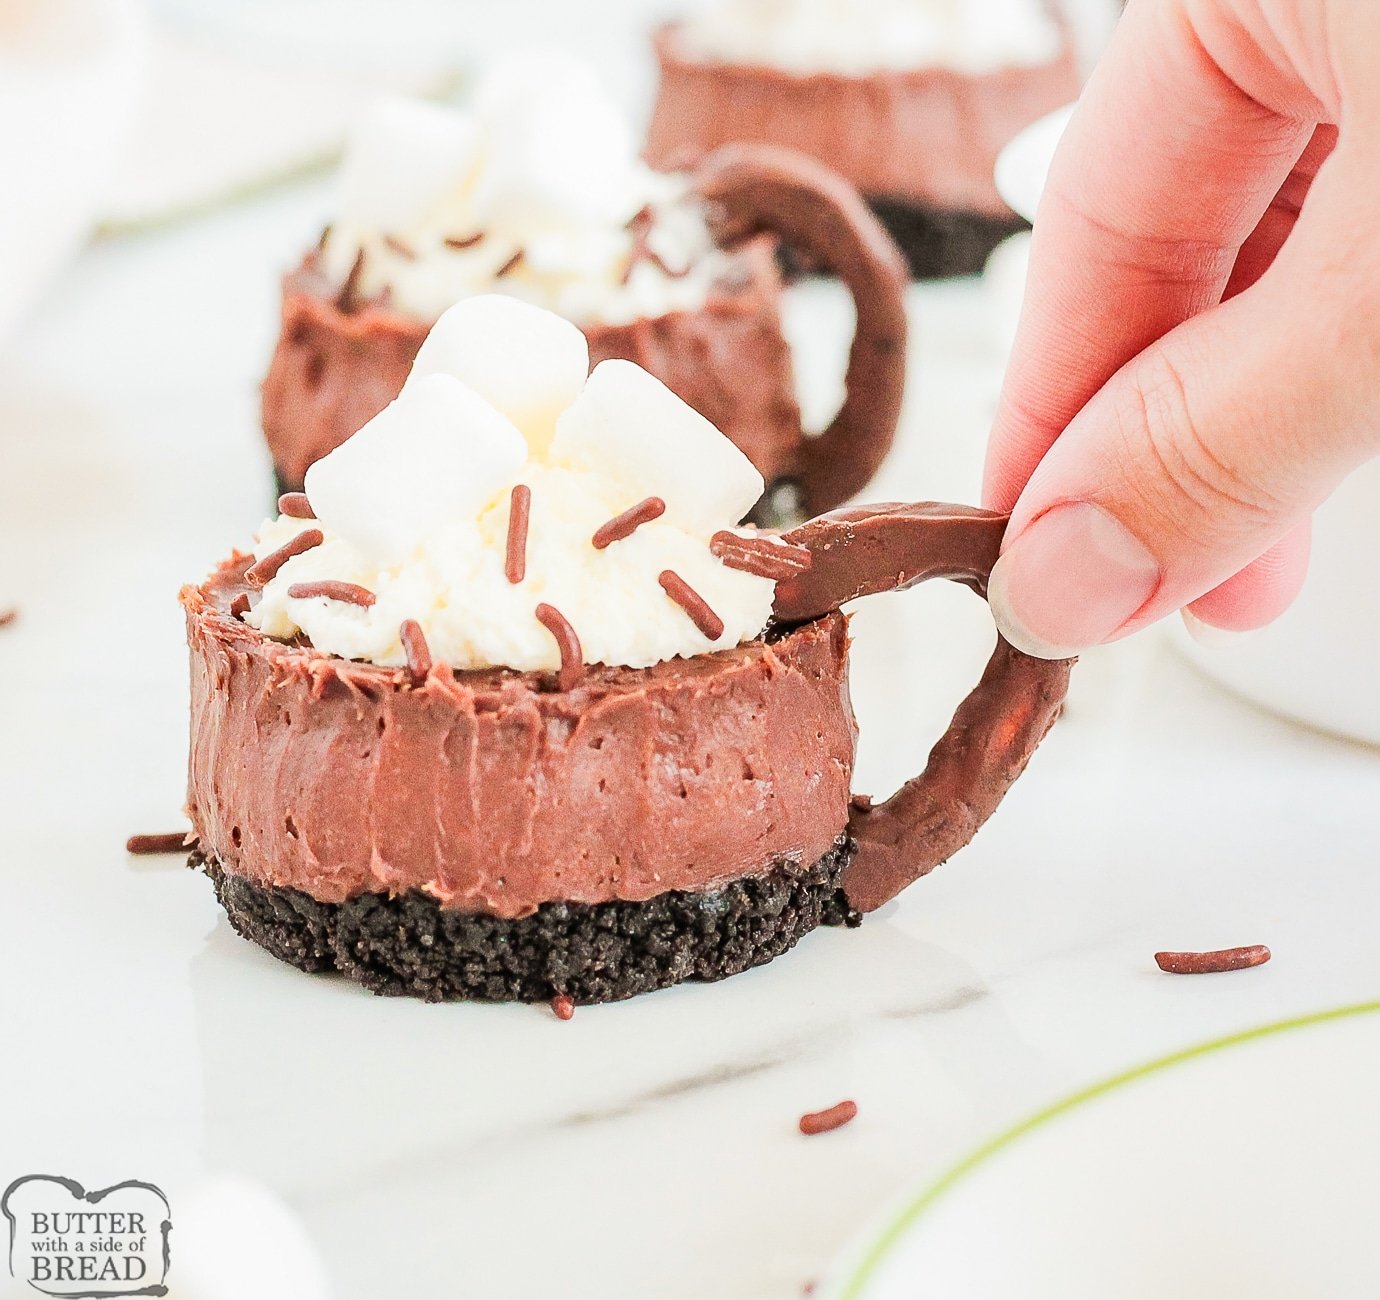 holding a hot chocolate cheesecake by its chocolate pretzel handle